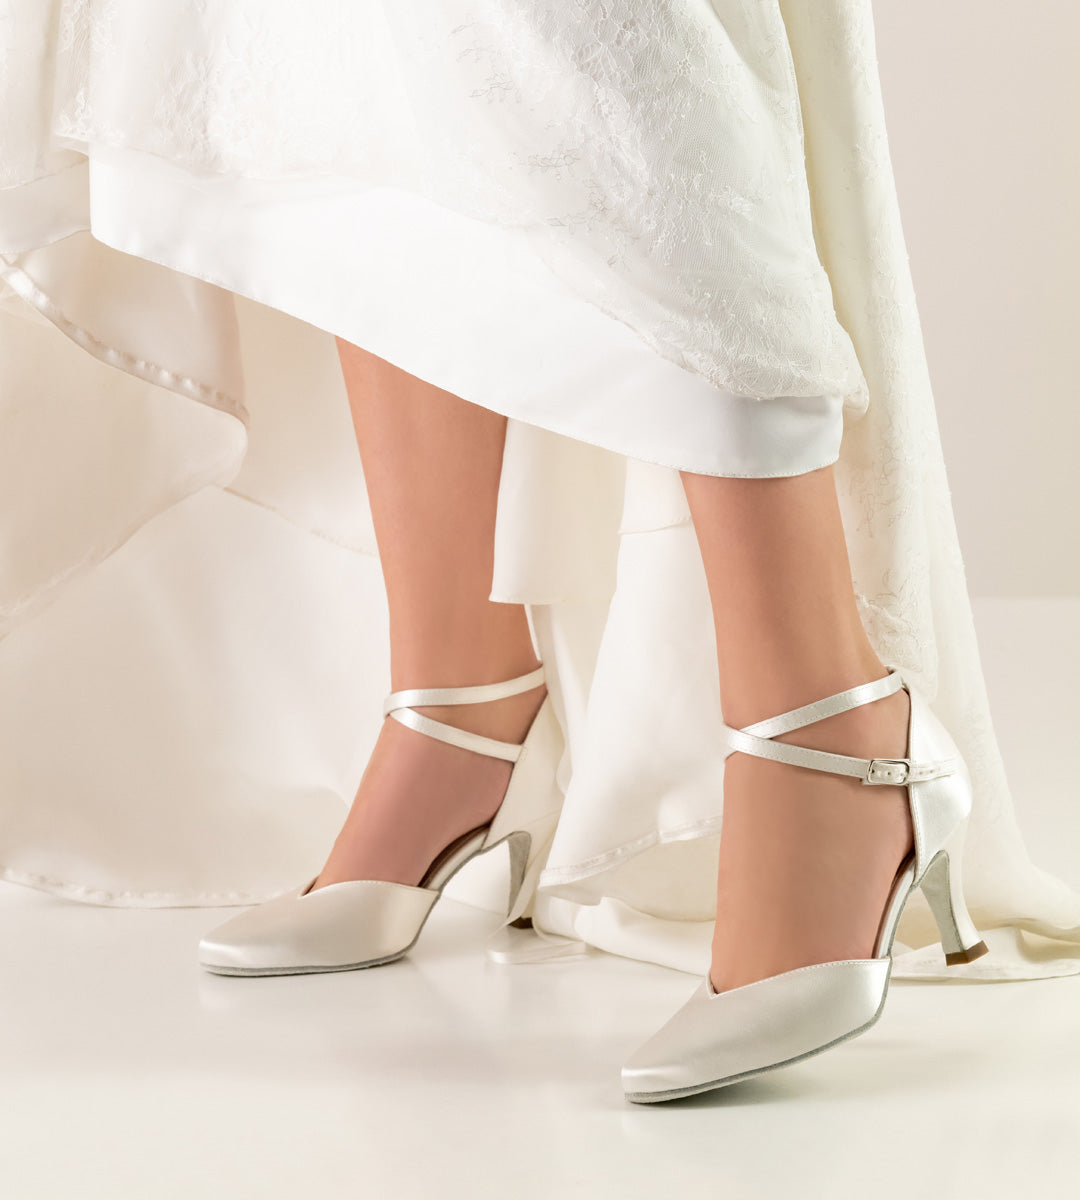 Werner Kern Betty Bridal Ballroom Shoes in White Satin with Dancing Soles or Leather Soles